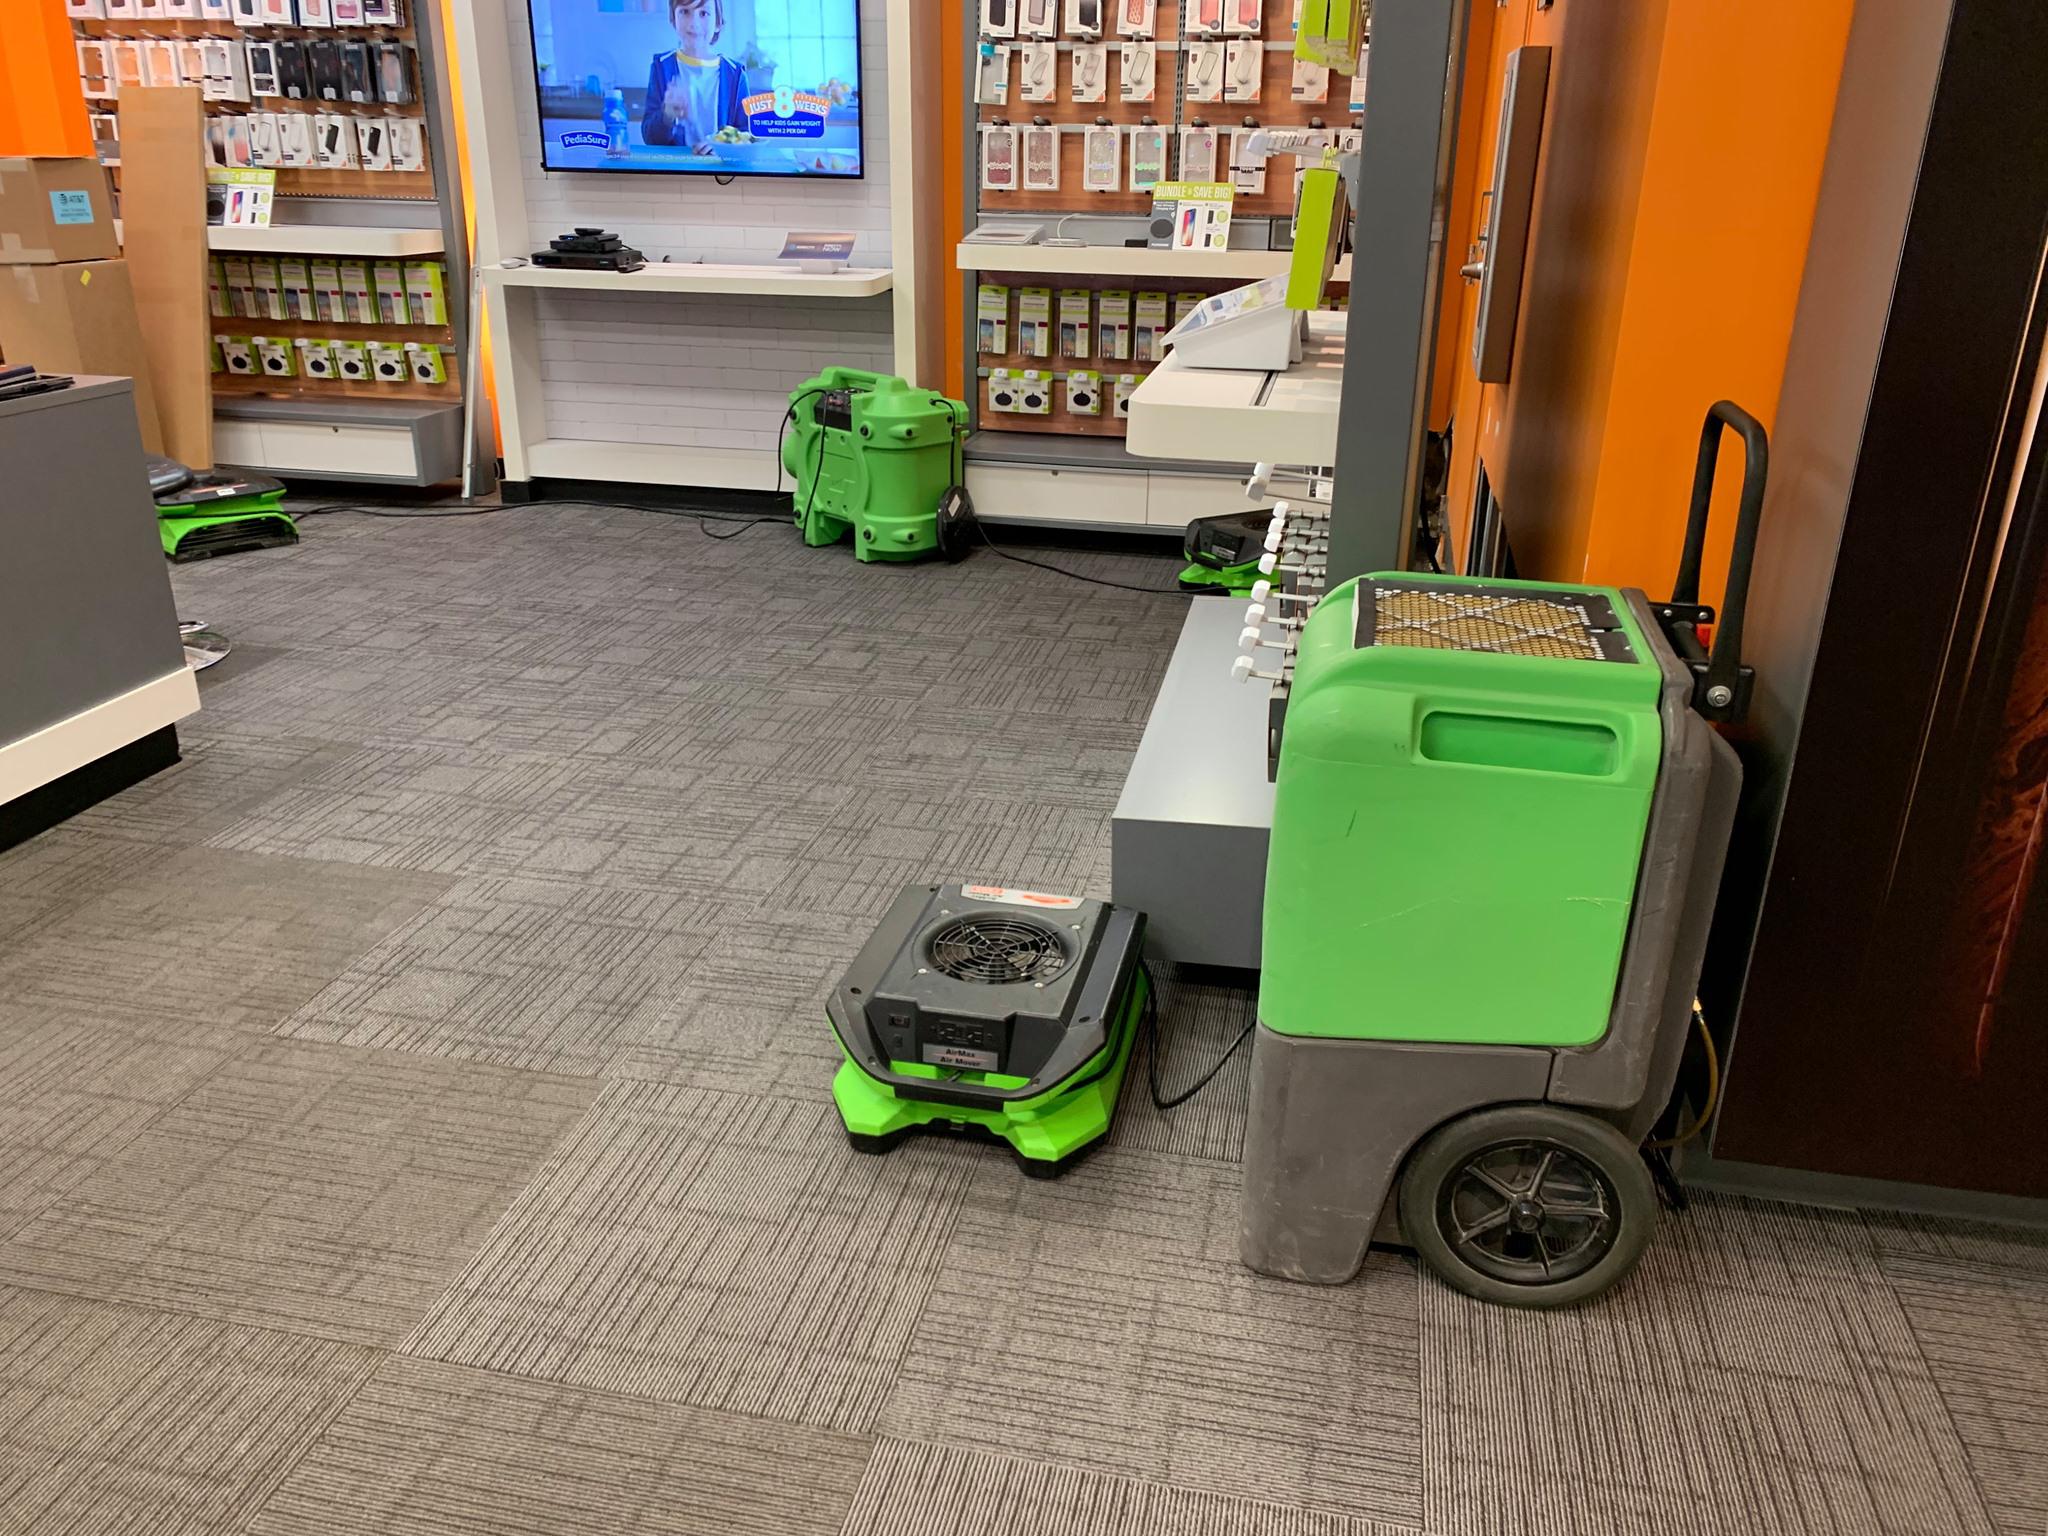 "Faster to any size disaster" to all commercial restoration project such as this one at AT&T! Commercial & water restoration is an area that our team takes great pride in. We had AT&T's doors back open in no time! Give our team a call today! (314) 846-0600